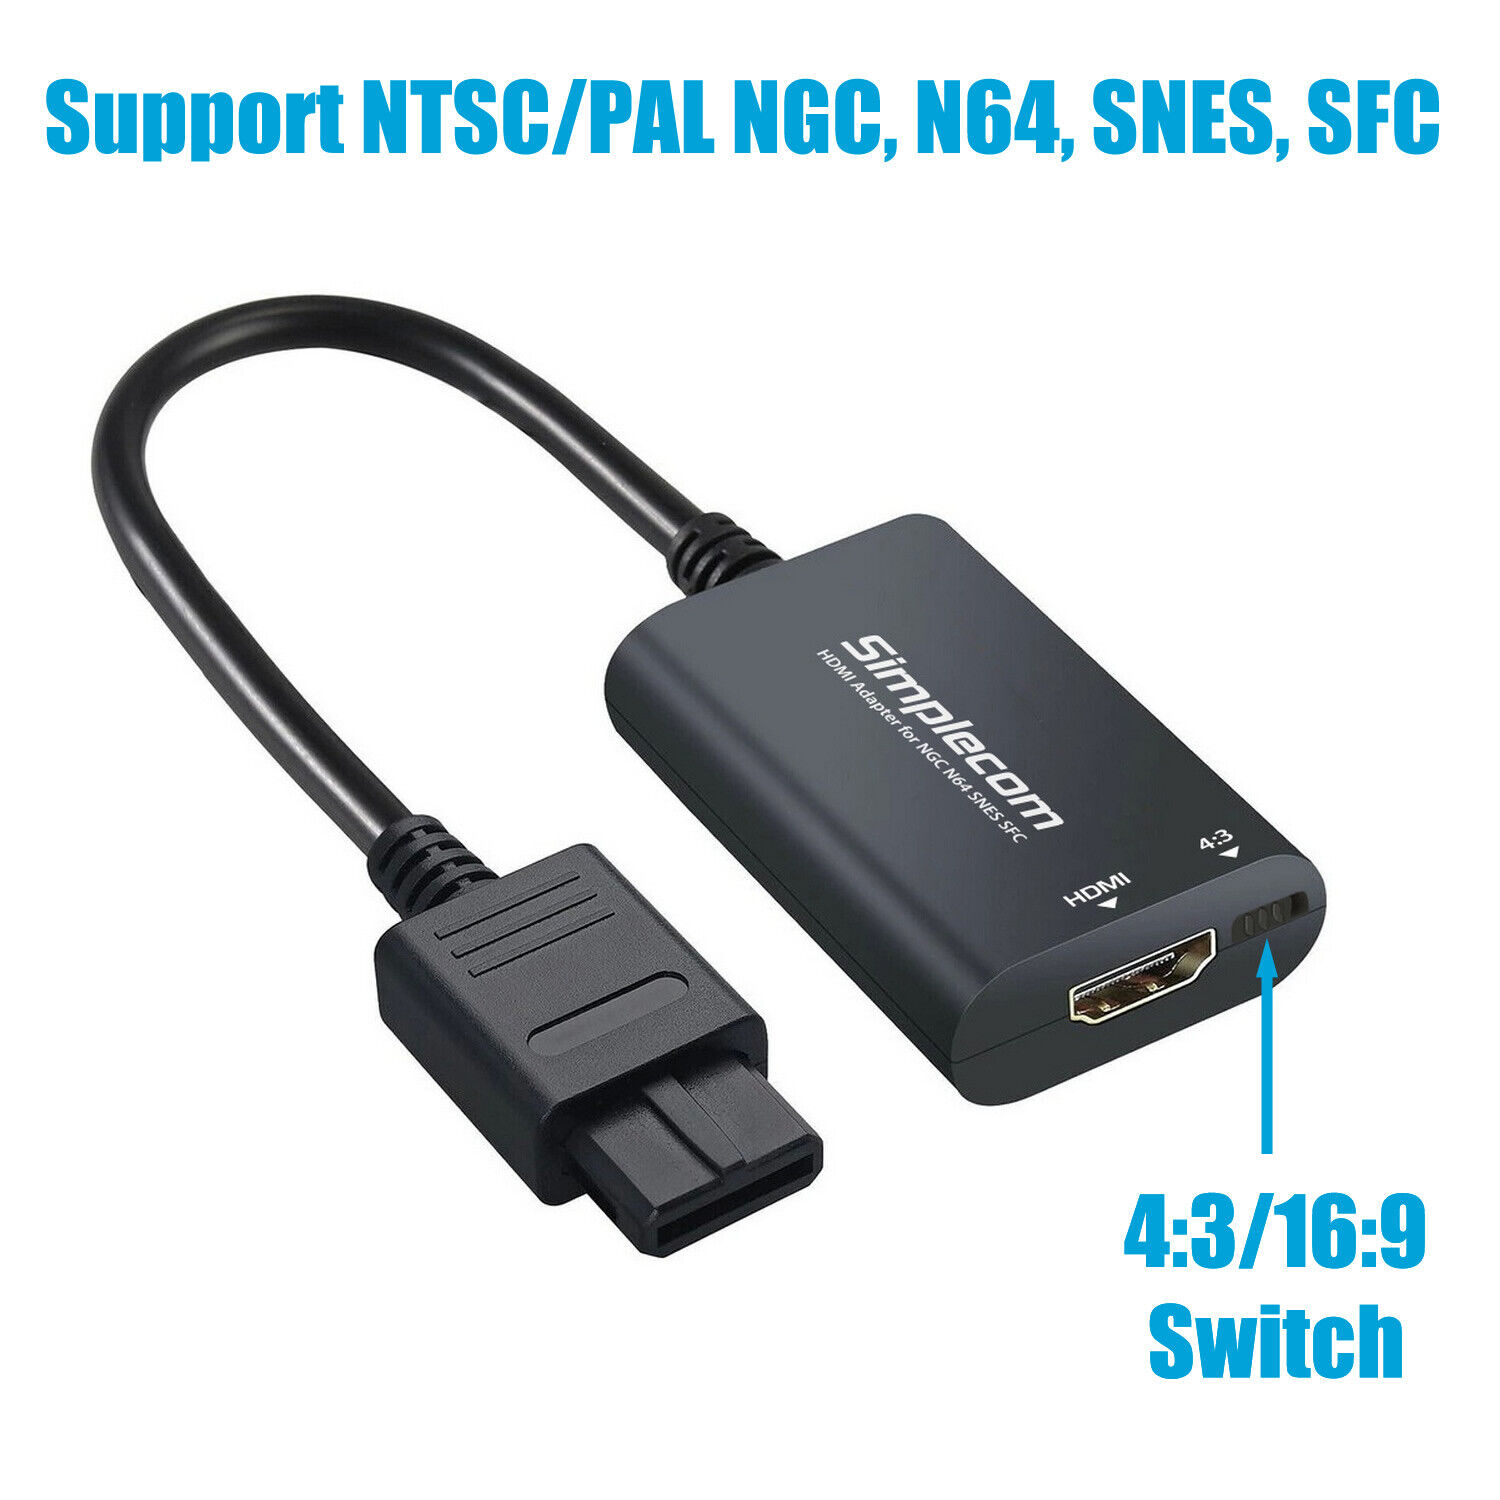 *Brand NEW*HDMI Cable Adapter Converter Composite AV to HDMI for Nintendo NGC N64 SNES SFC Connectivity: HDMI